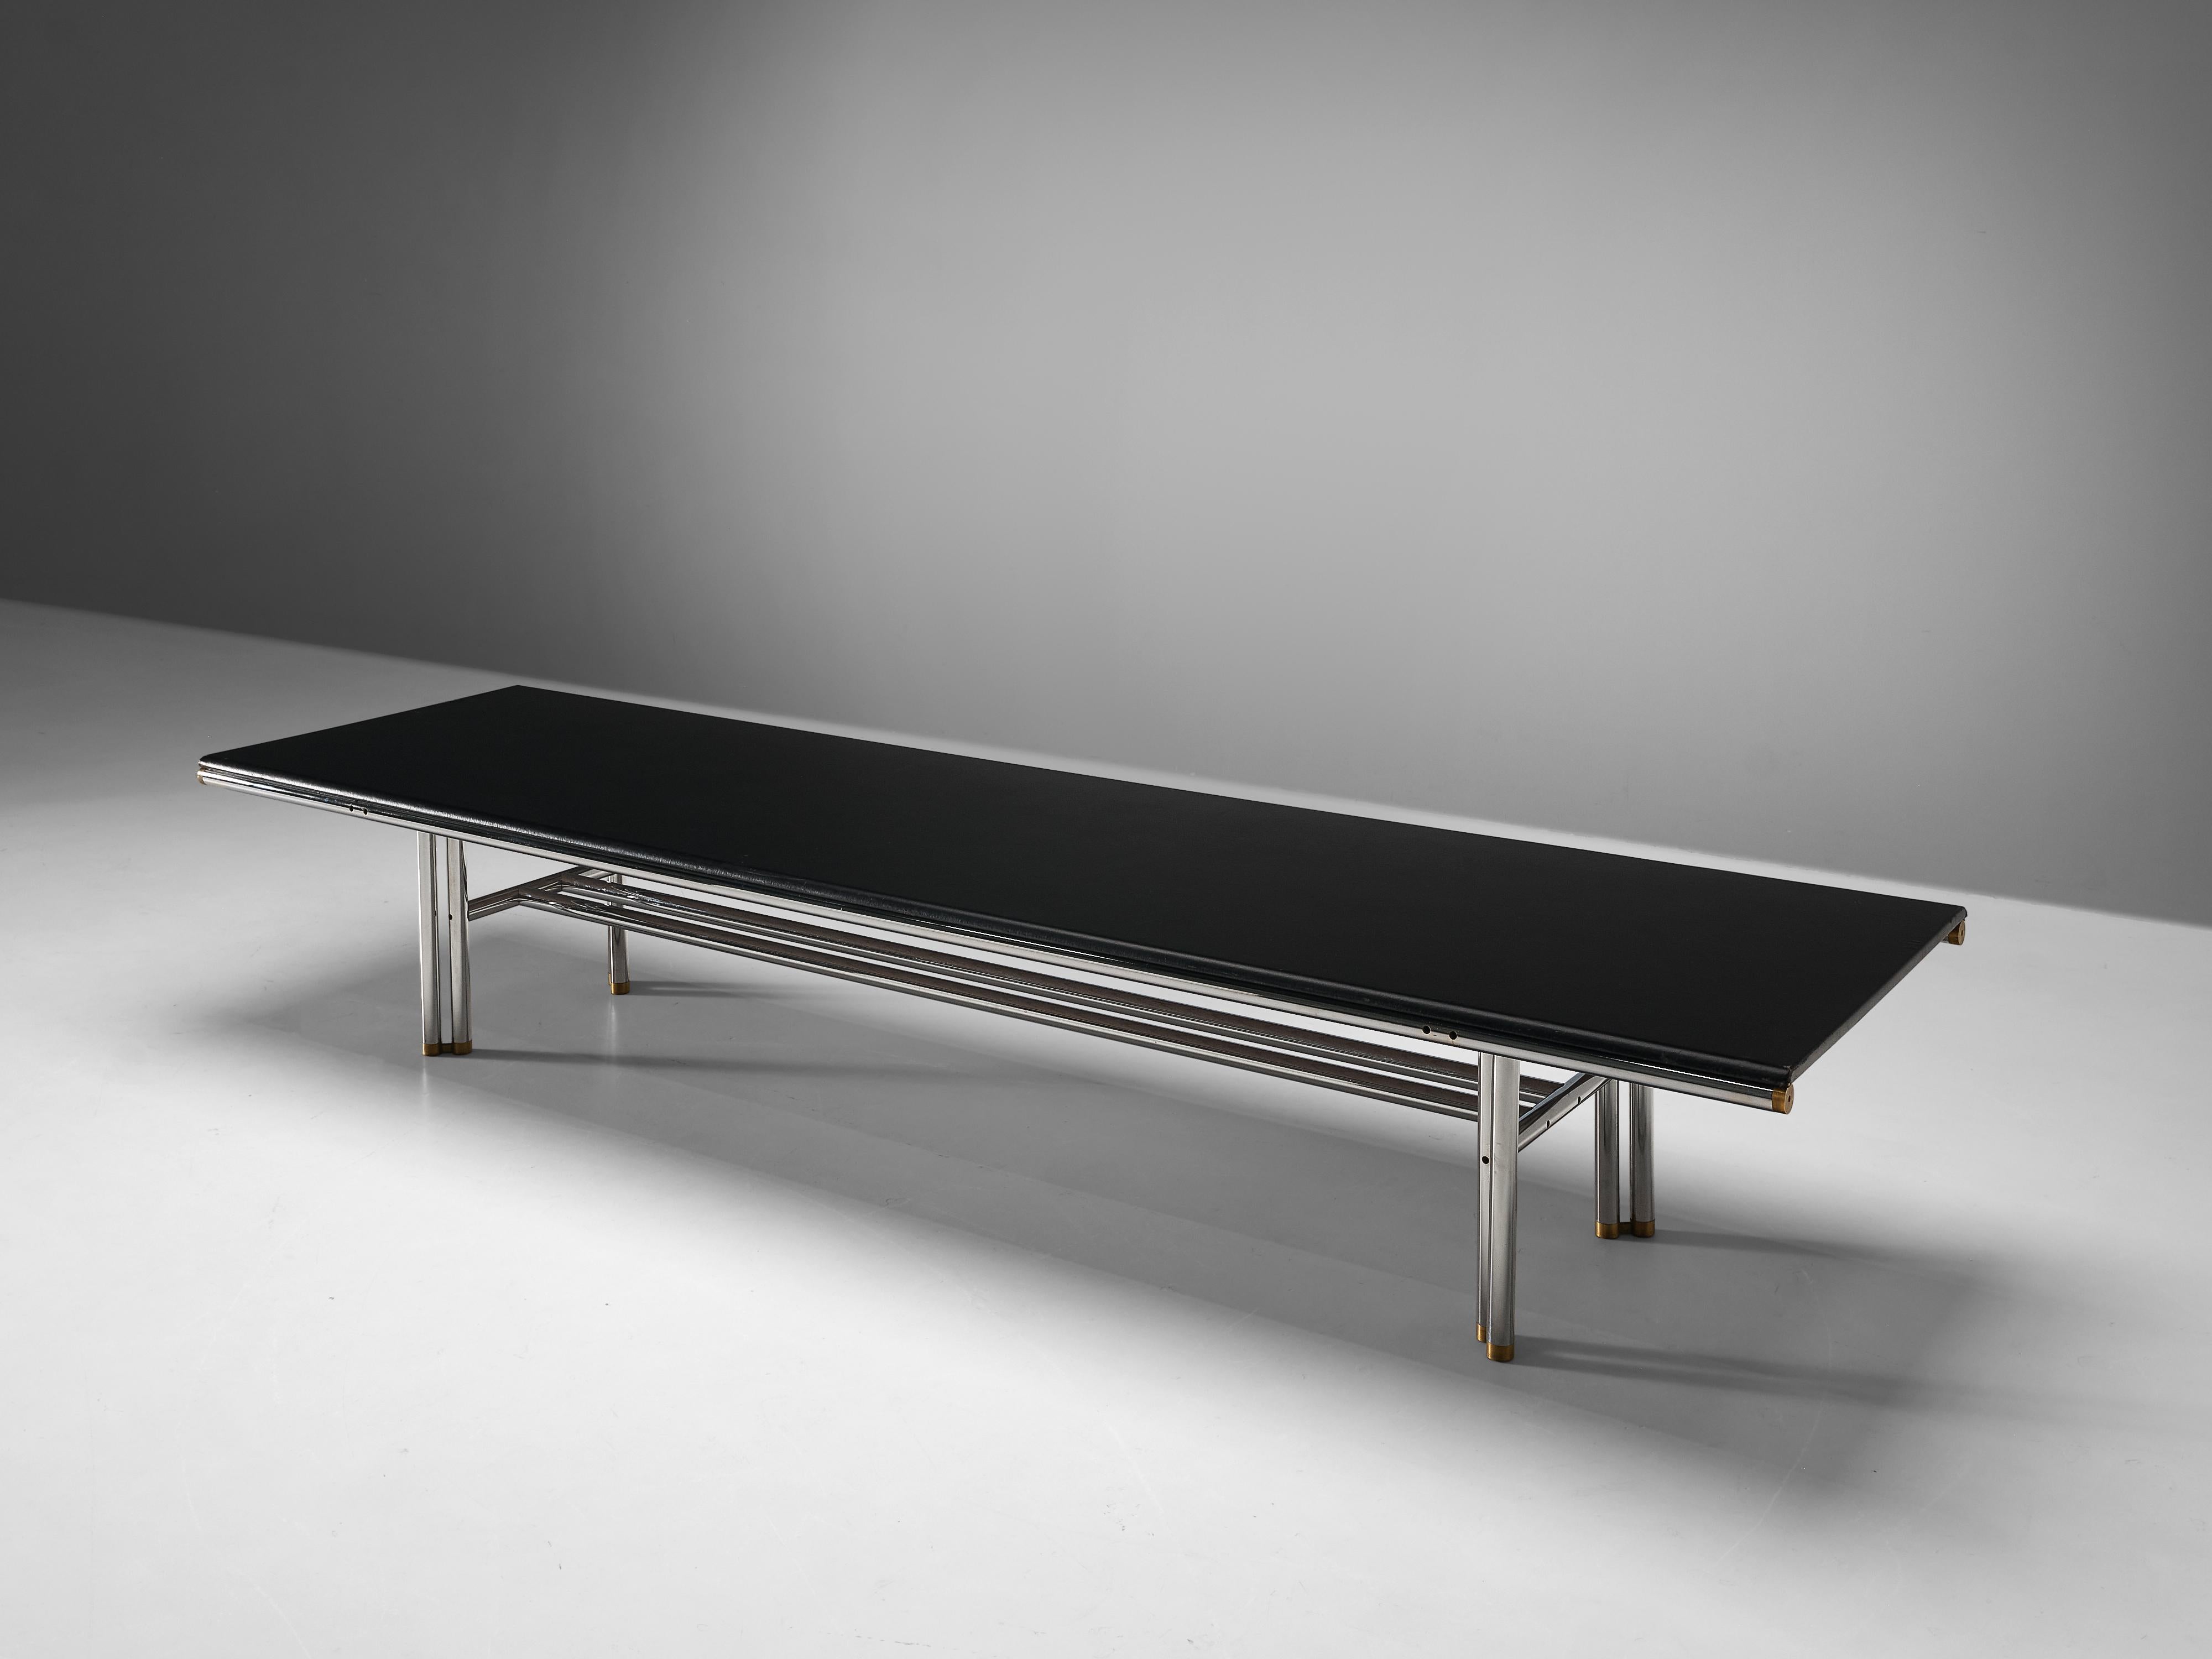 Carlo Scarpa and Hiroyuki Toyoda for Simon Gavina, conference table, faux leather, chromed steel, brass, Italy, 1970s

Elegant conference table was initially designed by Carlo Scarpa in 1973. However, it never went in to production. After Scarpa’s